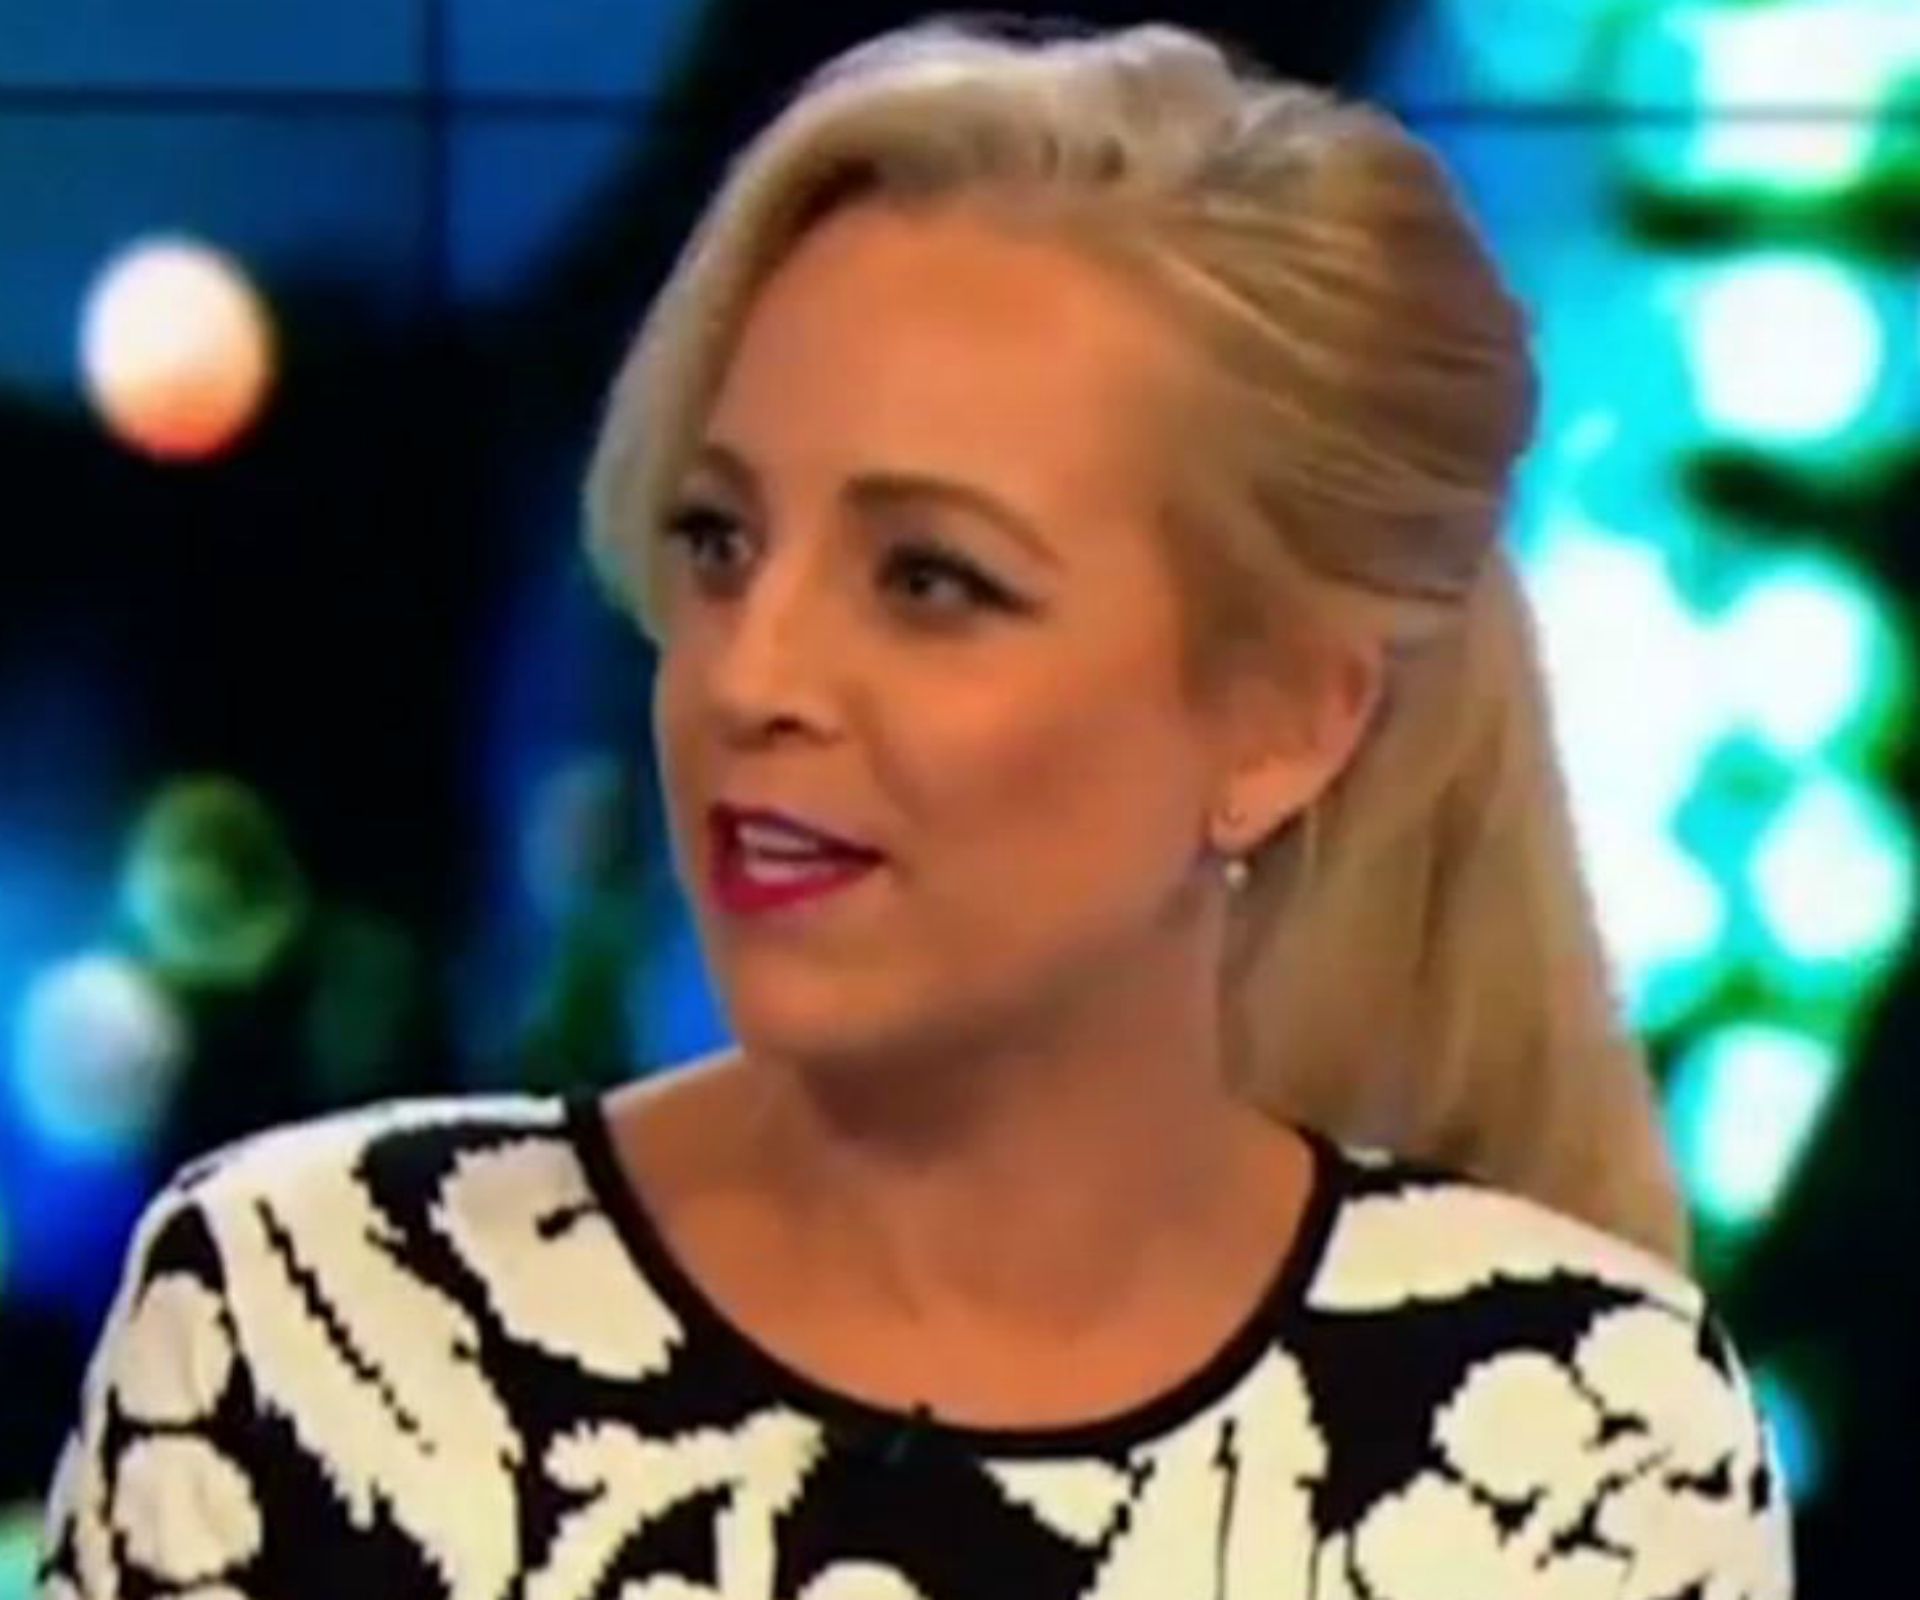 Carrie Bickmore gets emotional speaking about late husband’s brain surgery